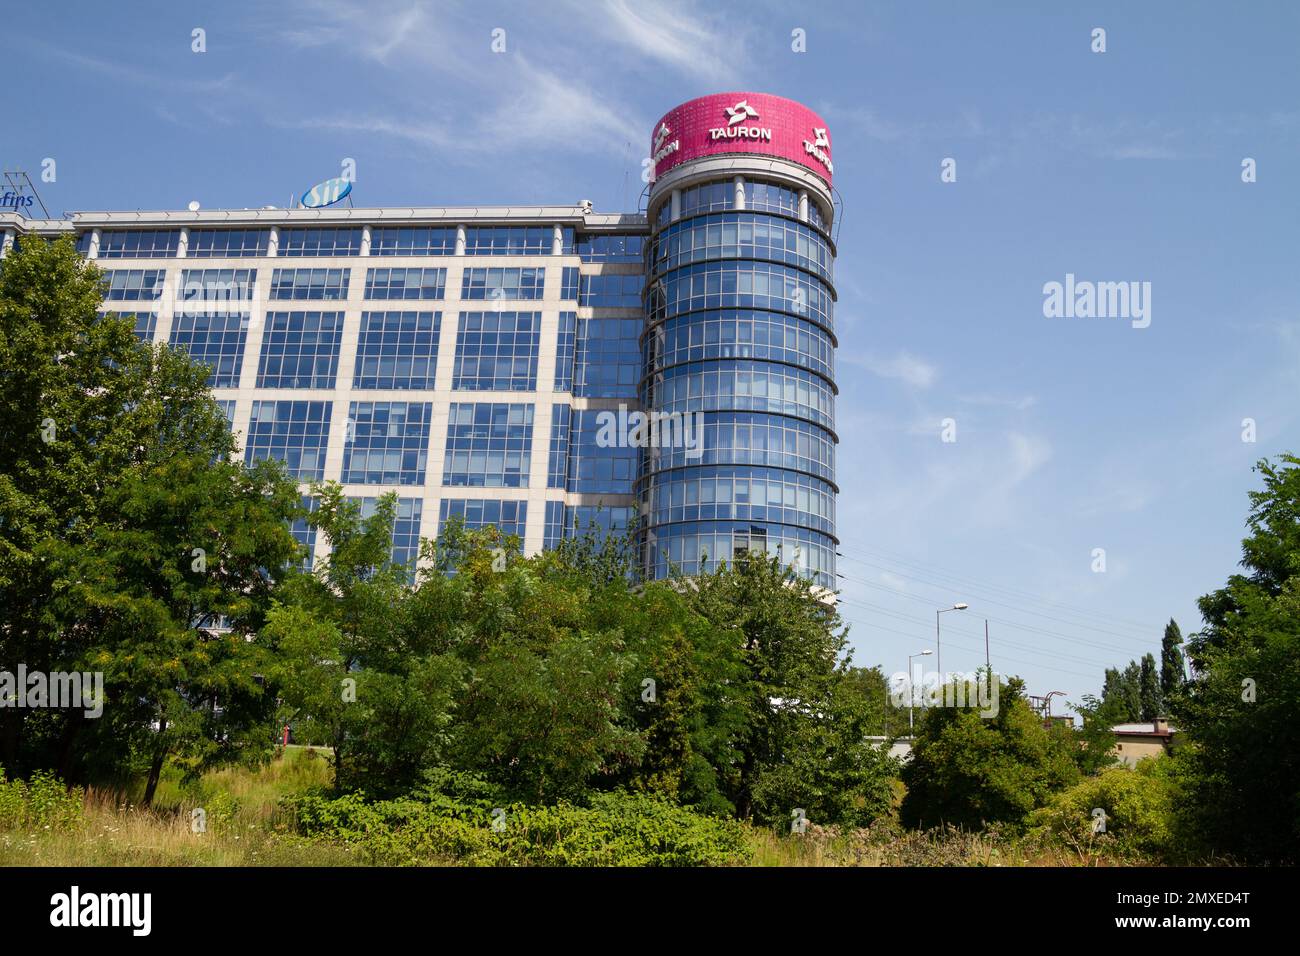 Tauron Polska Energia headquarters in Katowice Business Point office building. Energy holding company in Poland, electricity distribution. Stock Photo